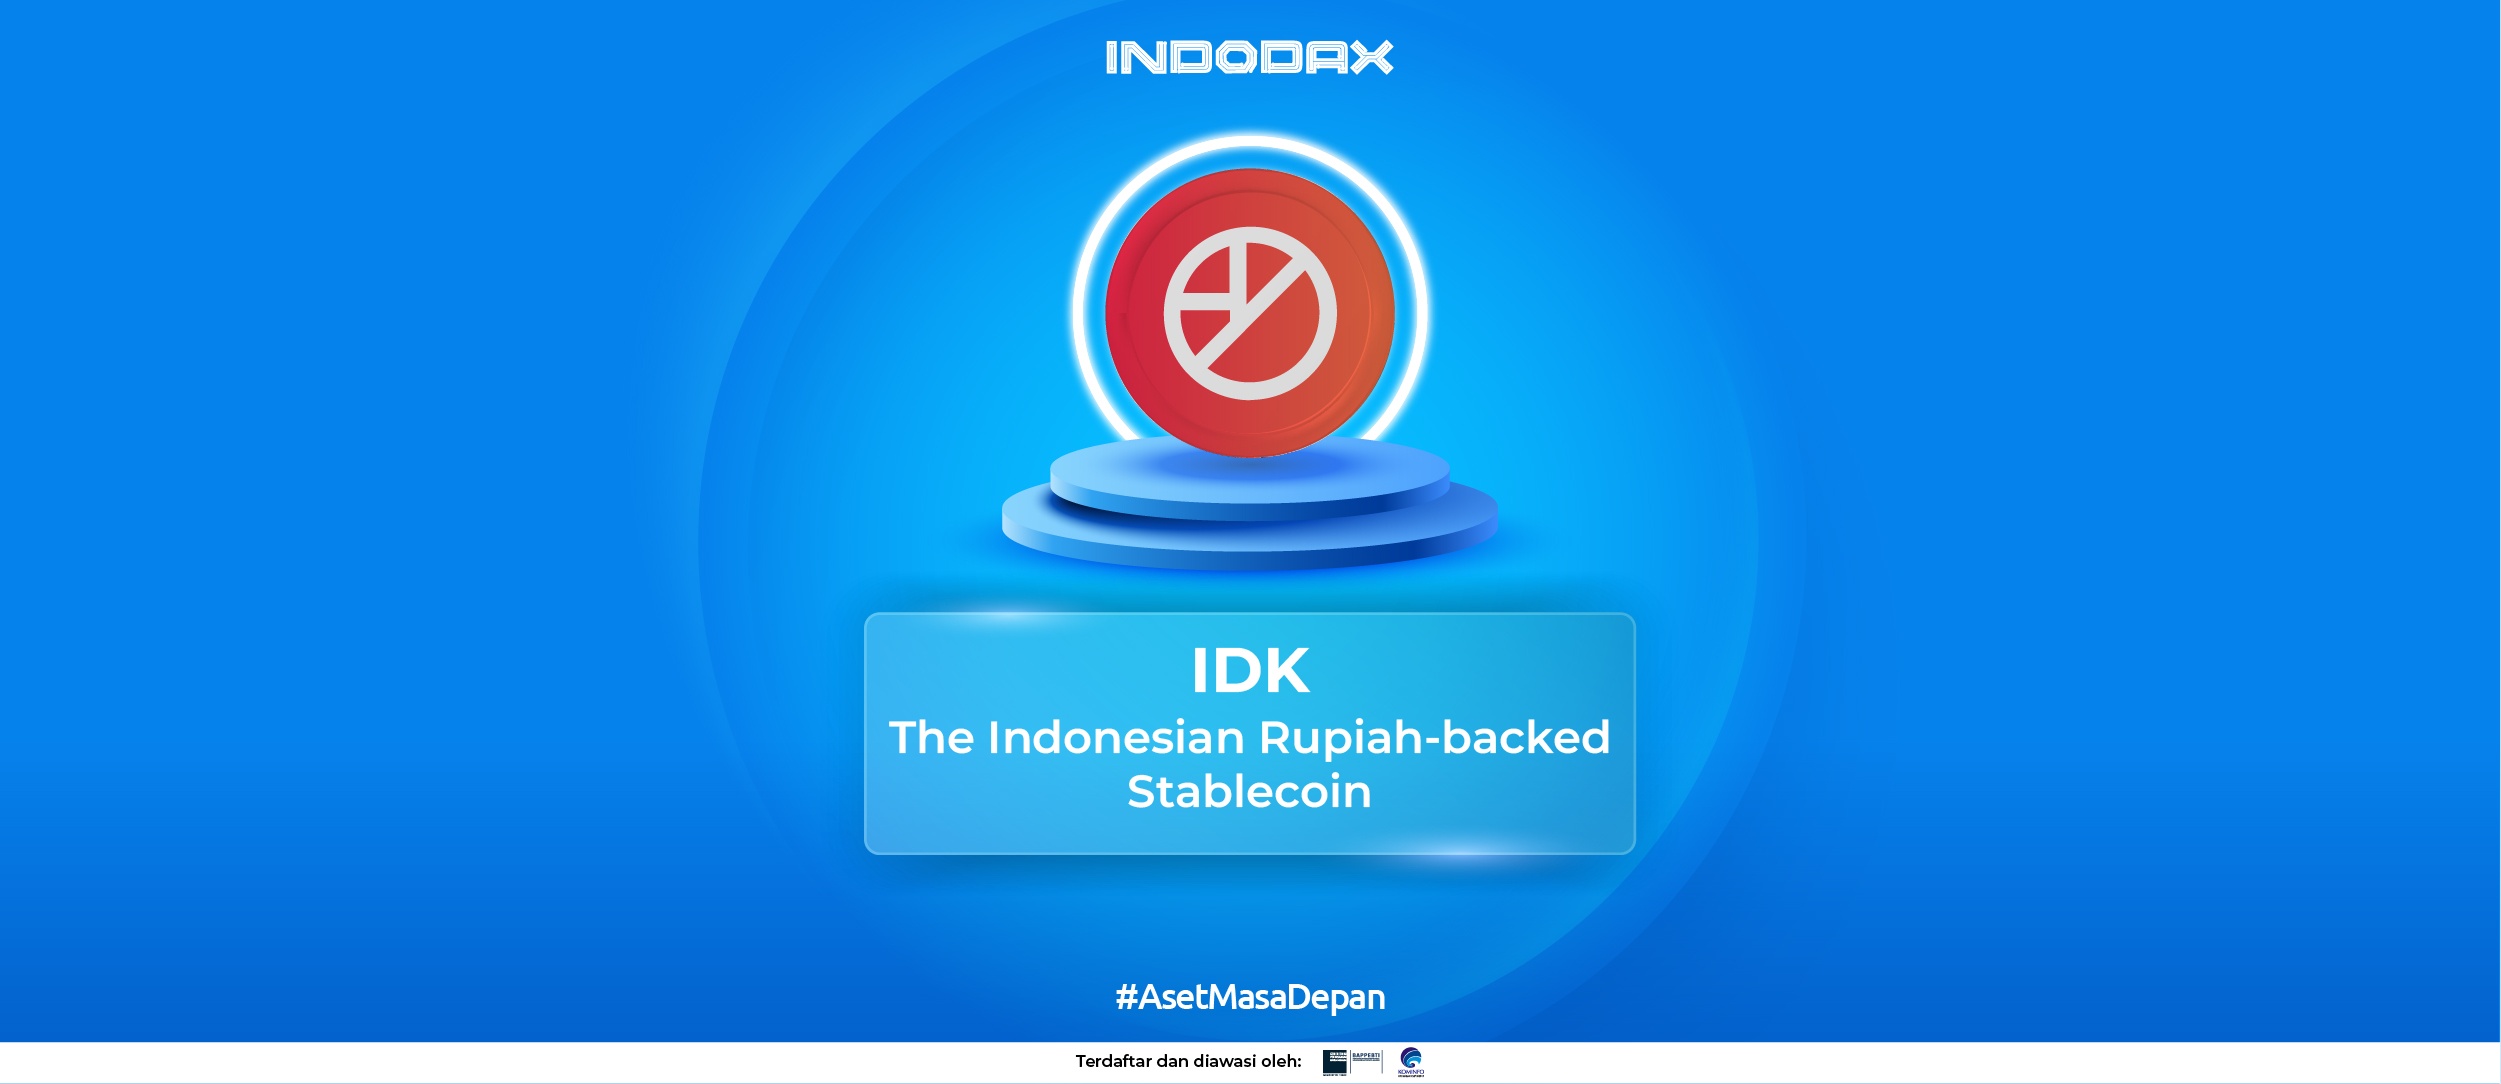 IDK The Indonesian Rupiah-backed Stablecoin